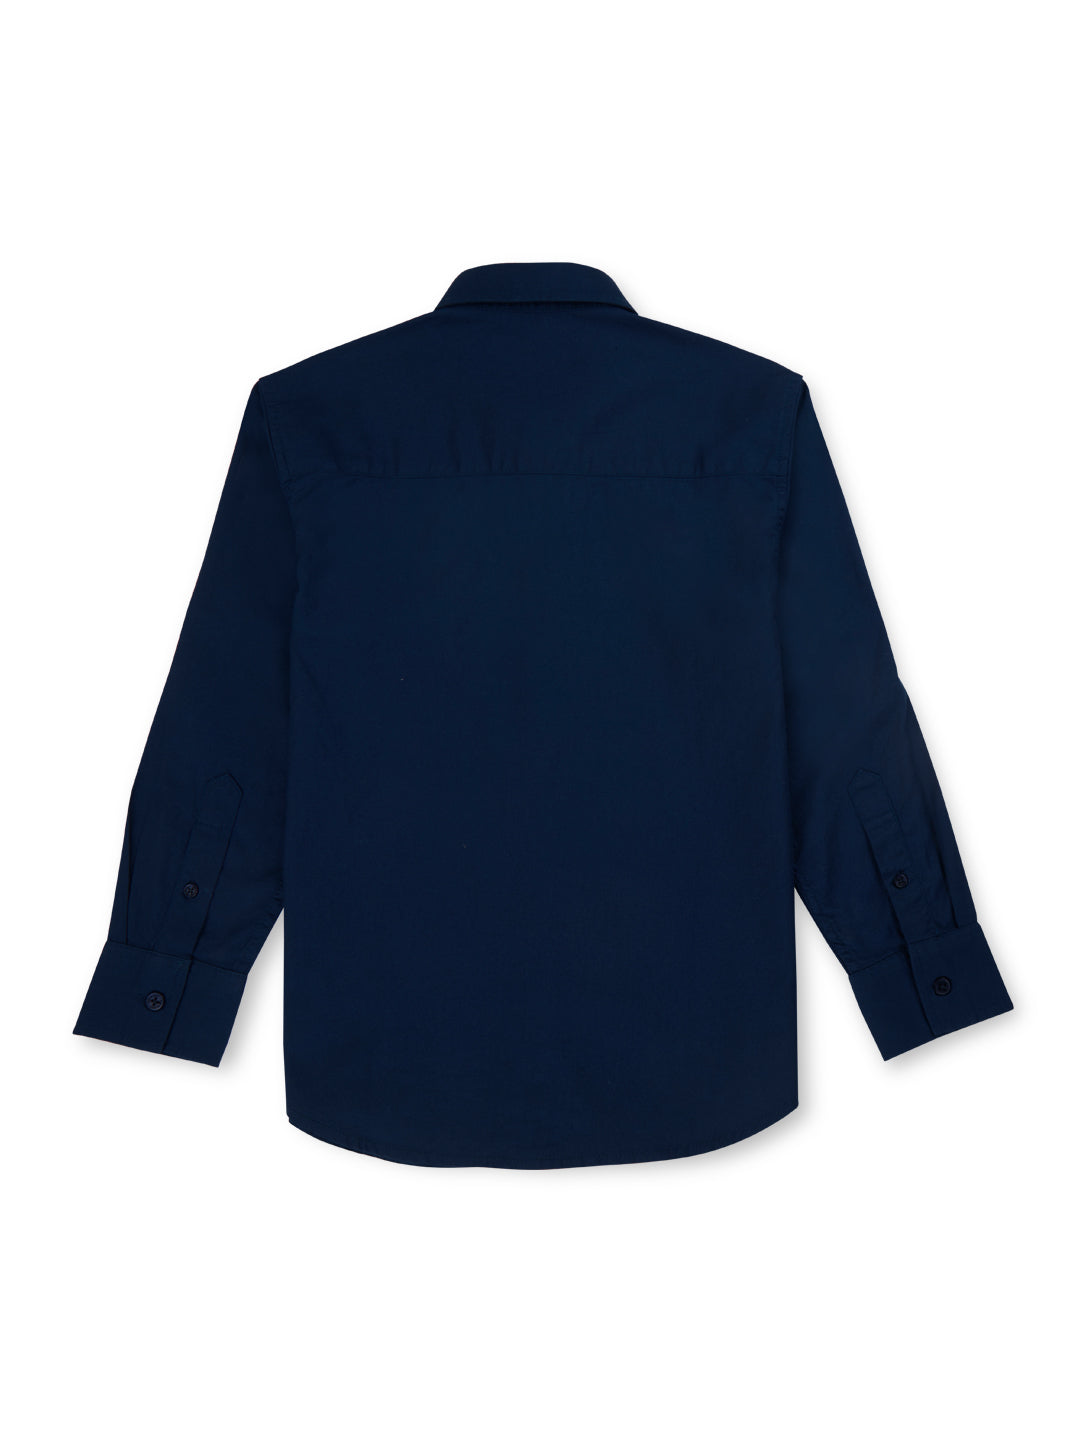 Boys Navy Blue Solid Cotton Full Sleeves Shirt